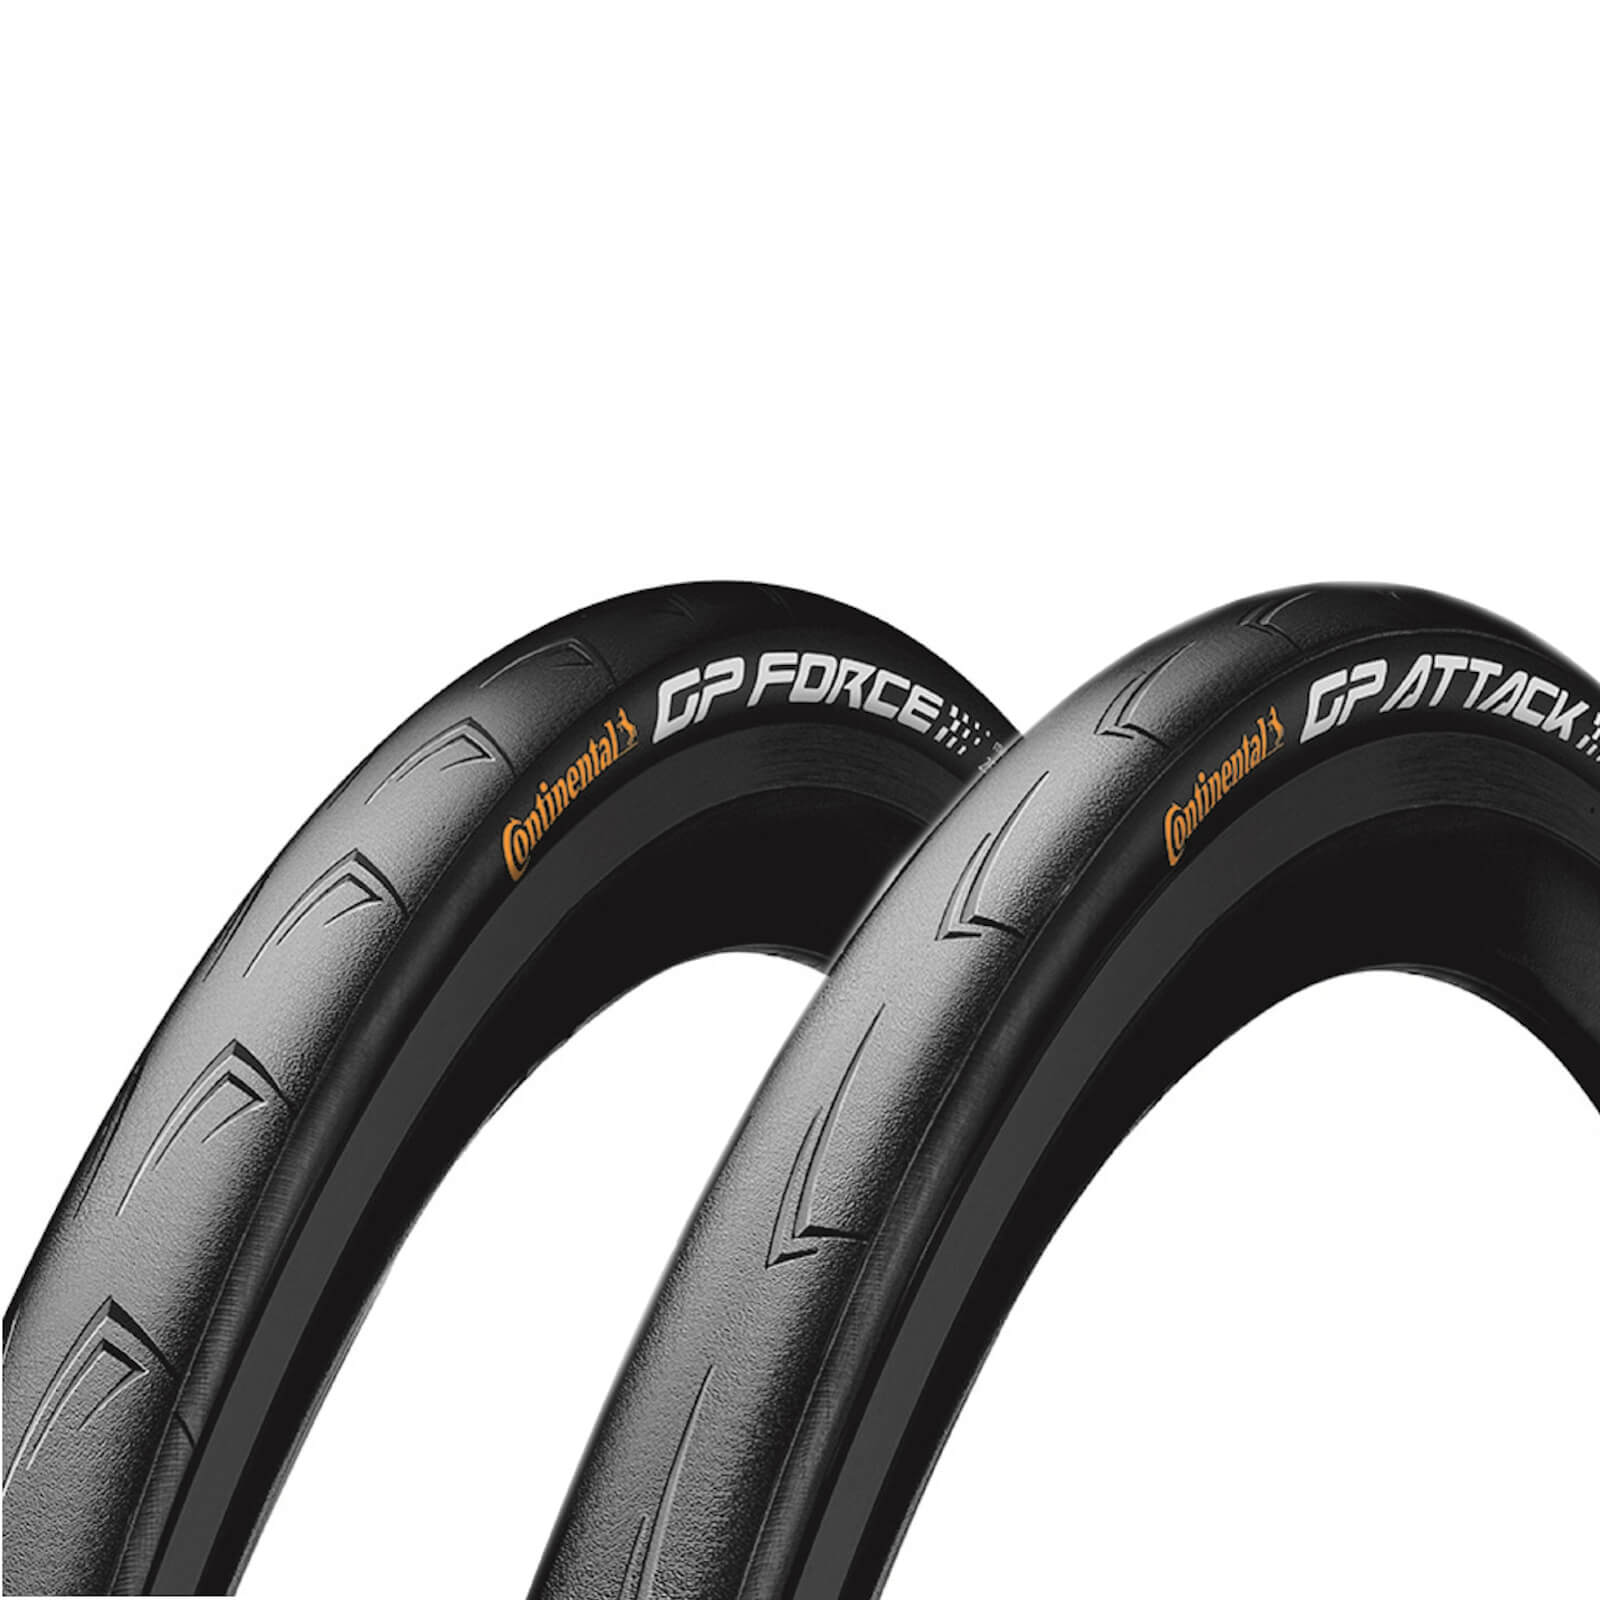 Continental GP Attack III and Force III Clincher Road Tires - 700c x 23-25mm